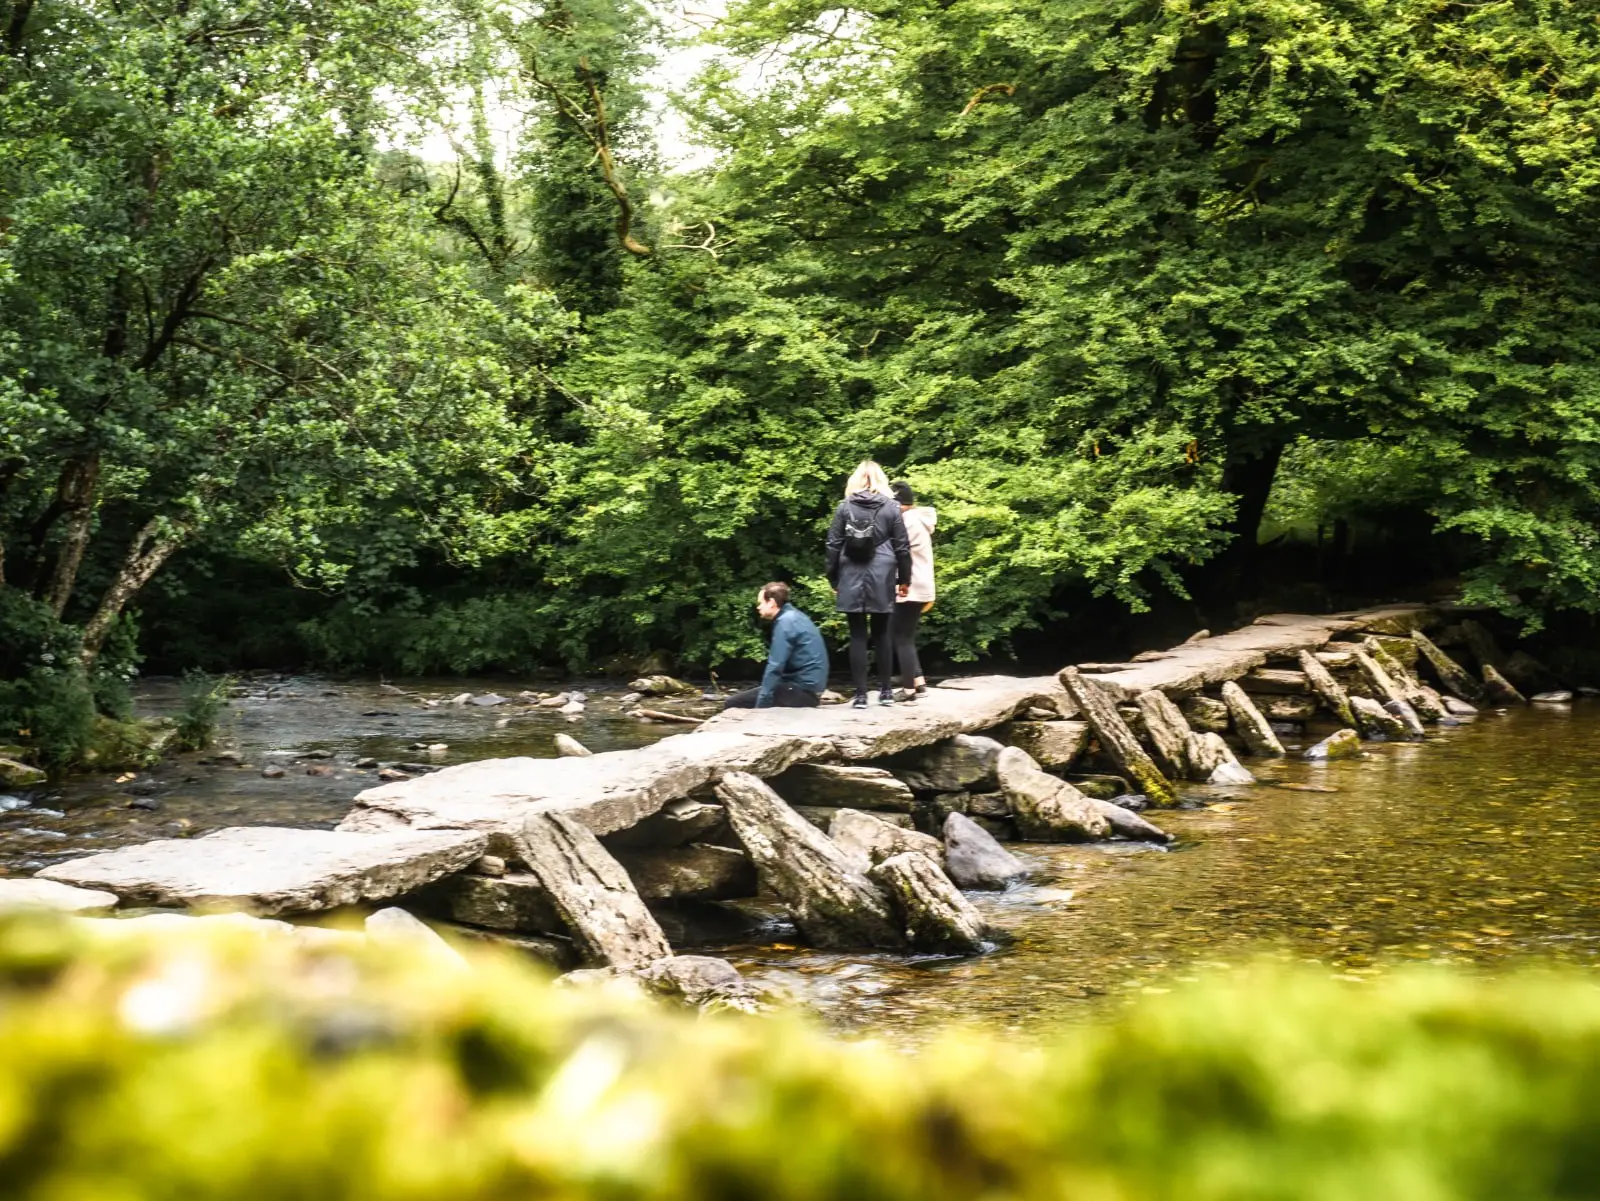 Tarr Steps - 7 Things to do in Exmoor